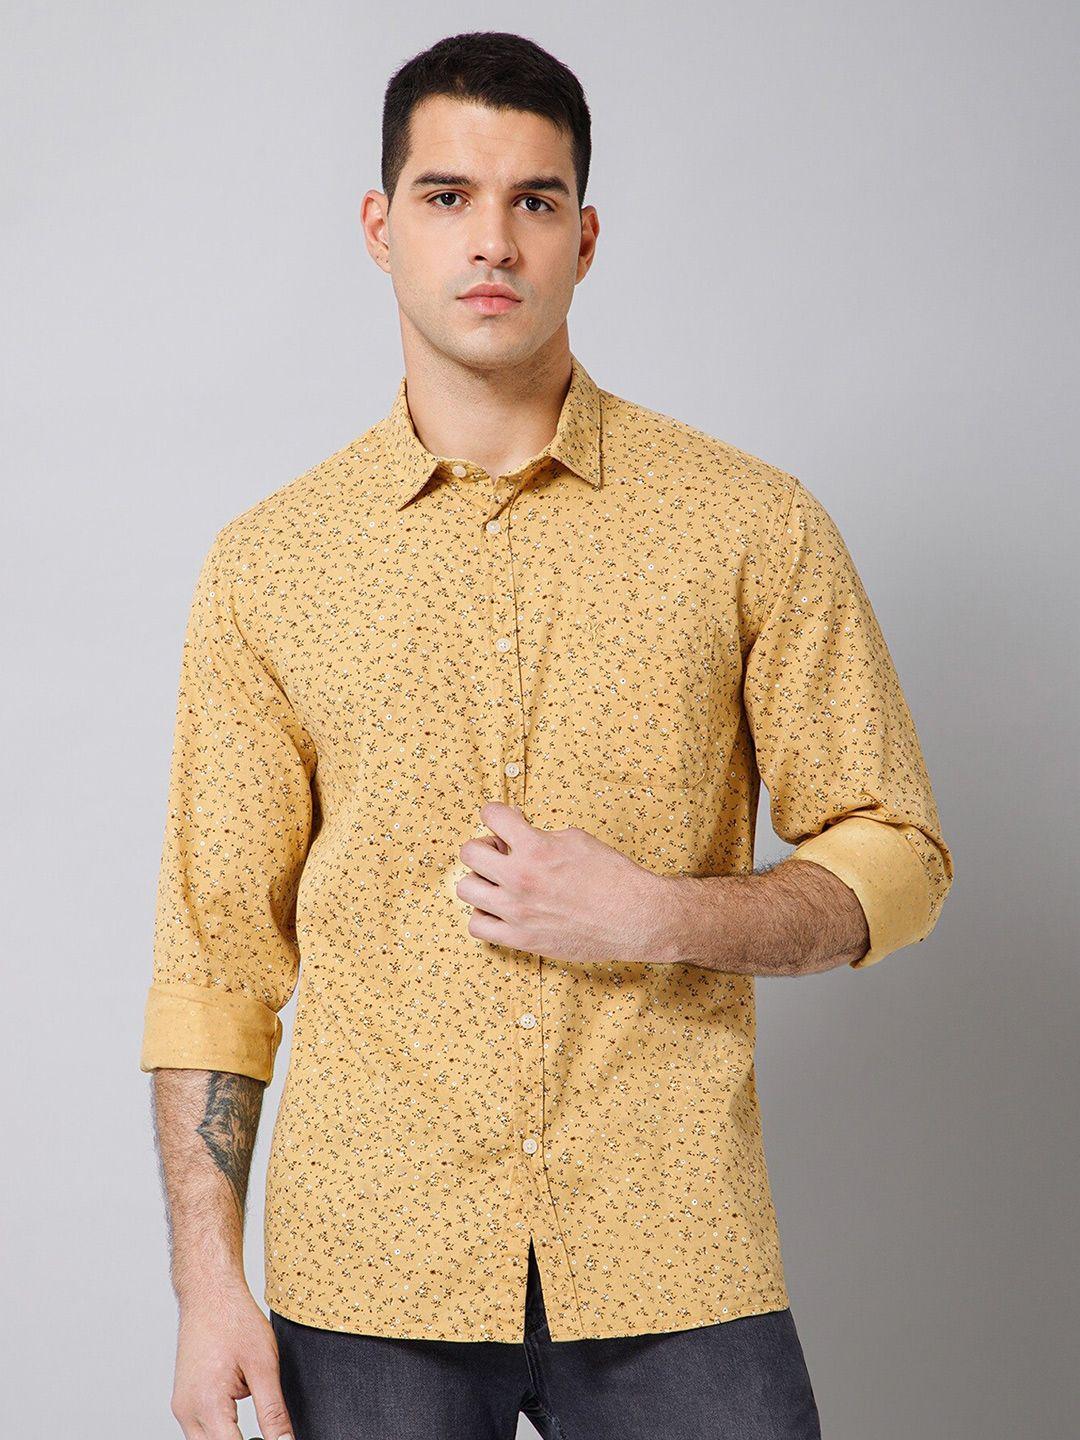 cantabil comfort floral printed spread collar cotton casual shirt